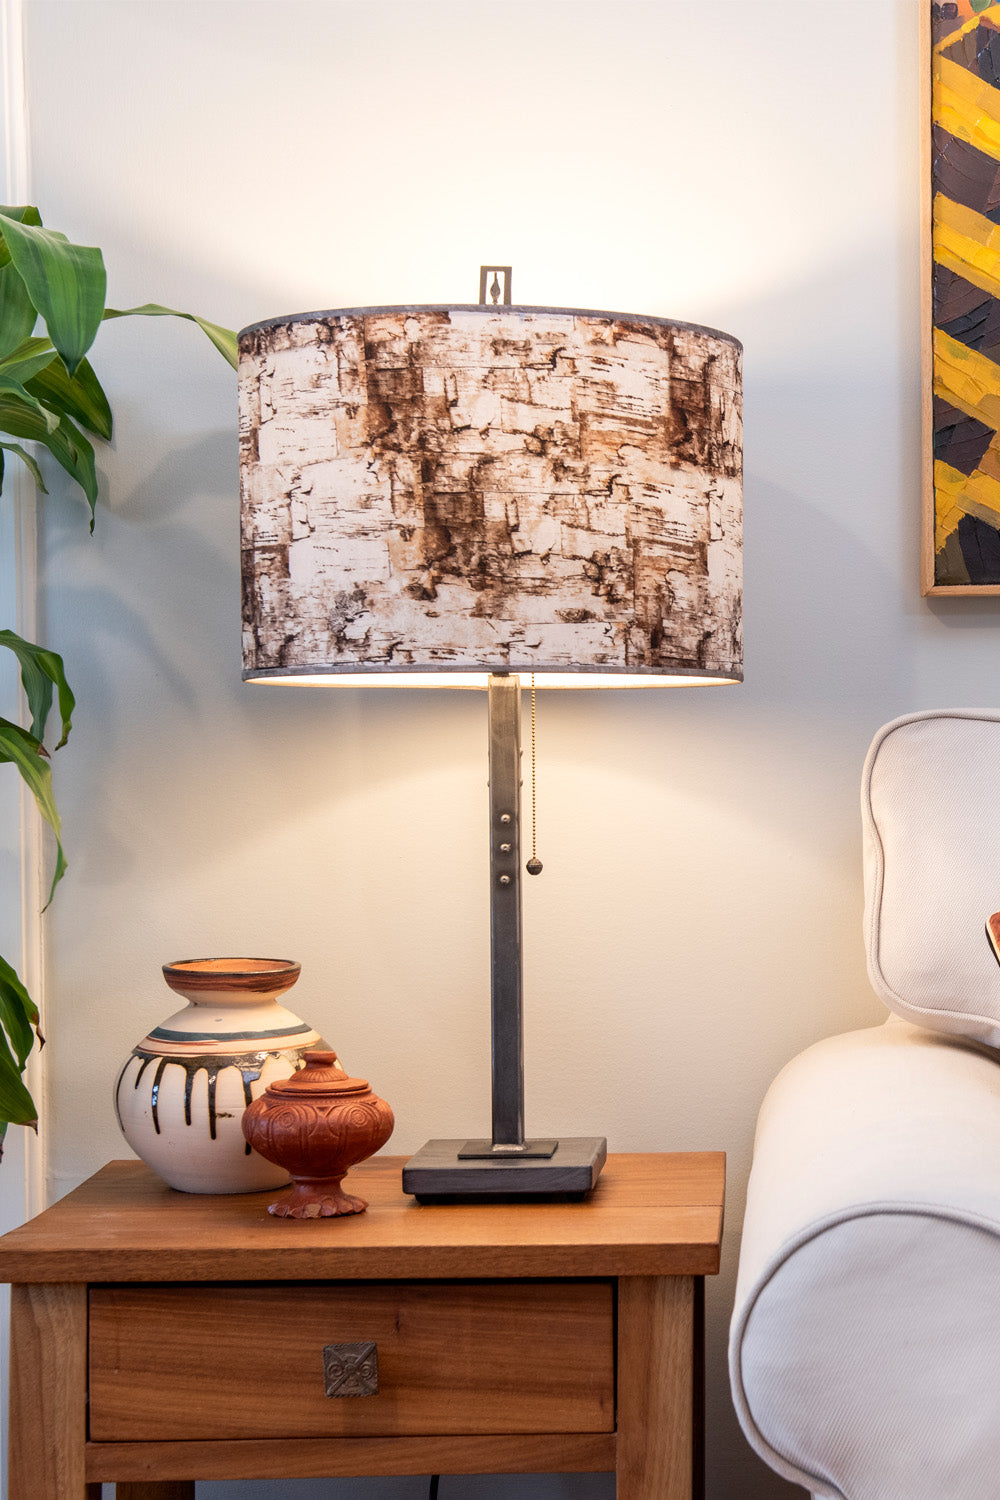 Janna Ugone & Co Table Lamp Steel Table Lamp with Large Drum Shade in Birch Bark